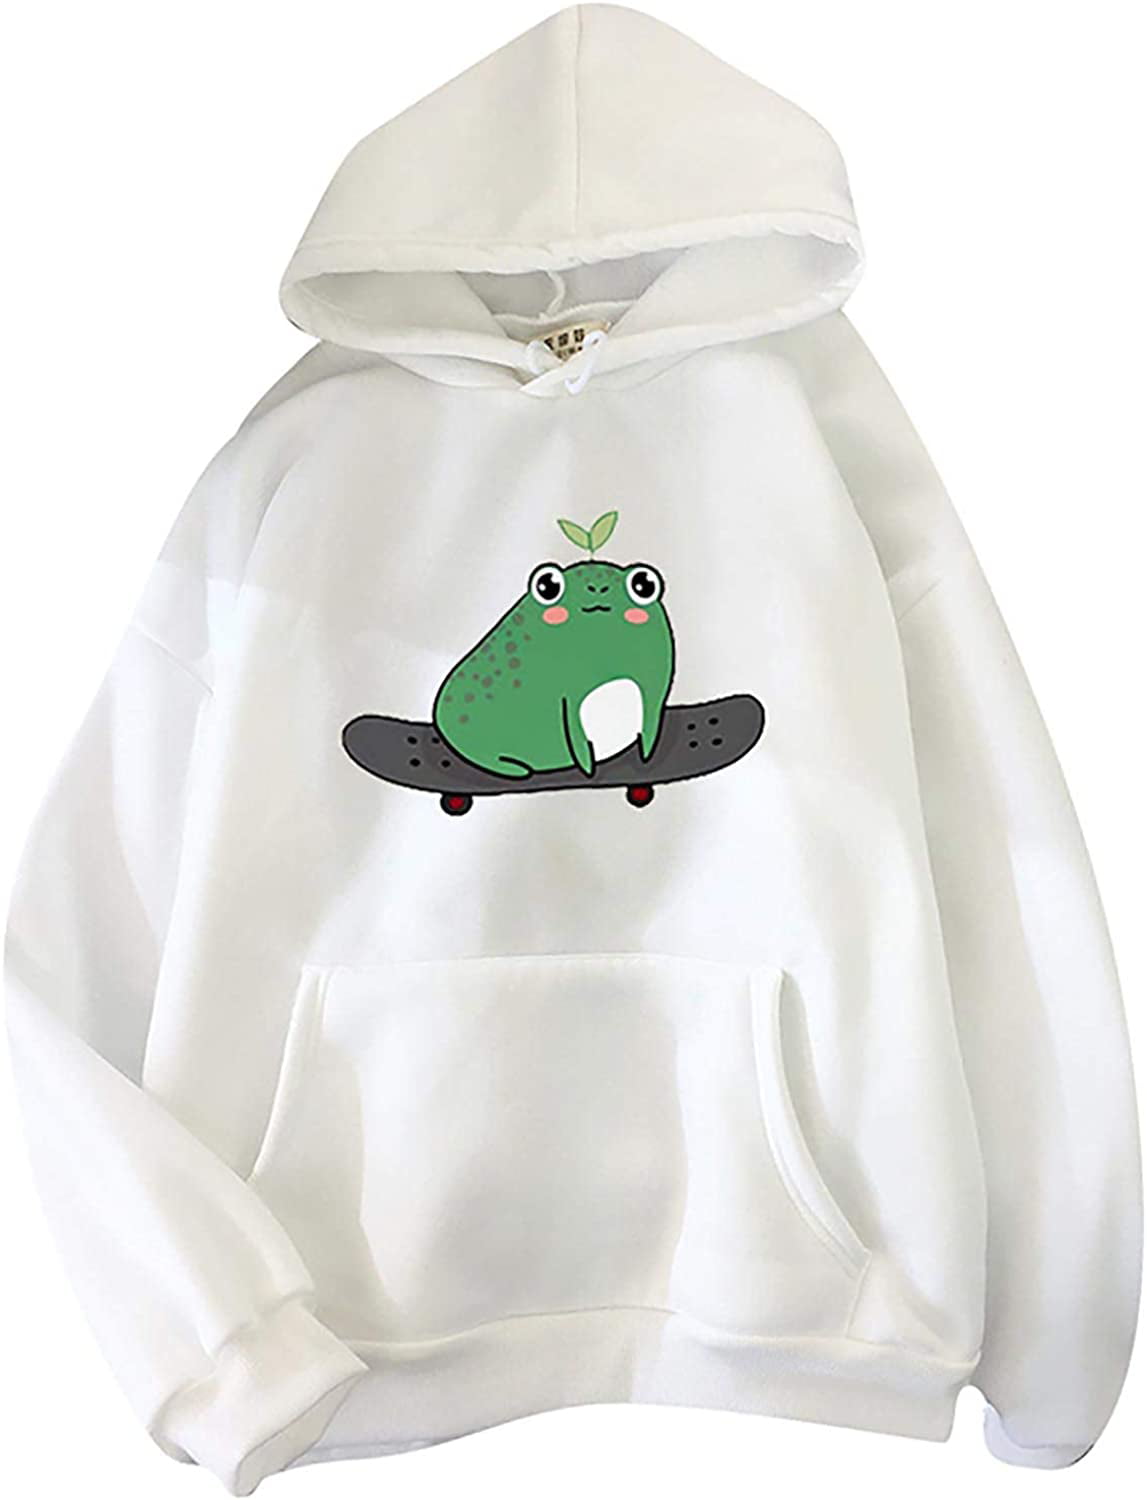 cooki Sweatshirts for Women Long Sleeve Skateboarding Frog Printed Hoodie Tops Casual Cute Pullover Sweater Shirts for Girls 